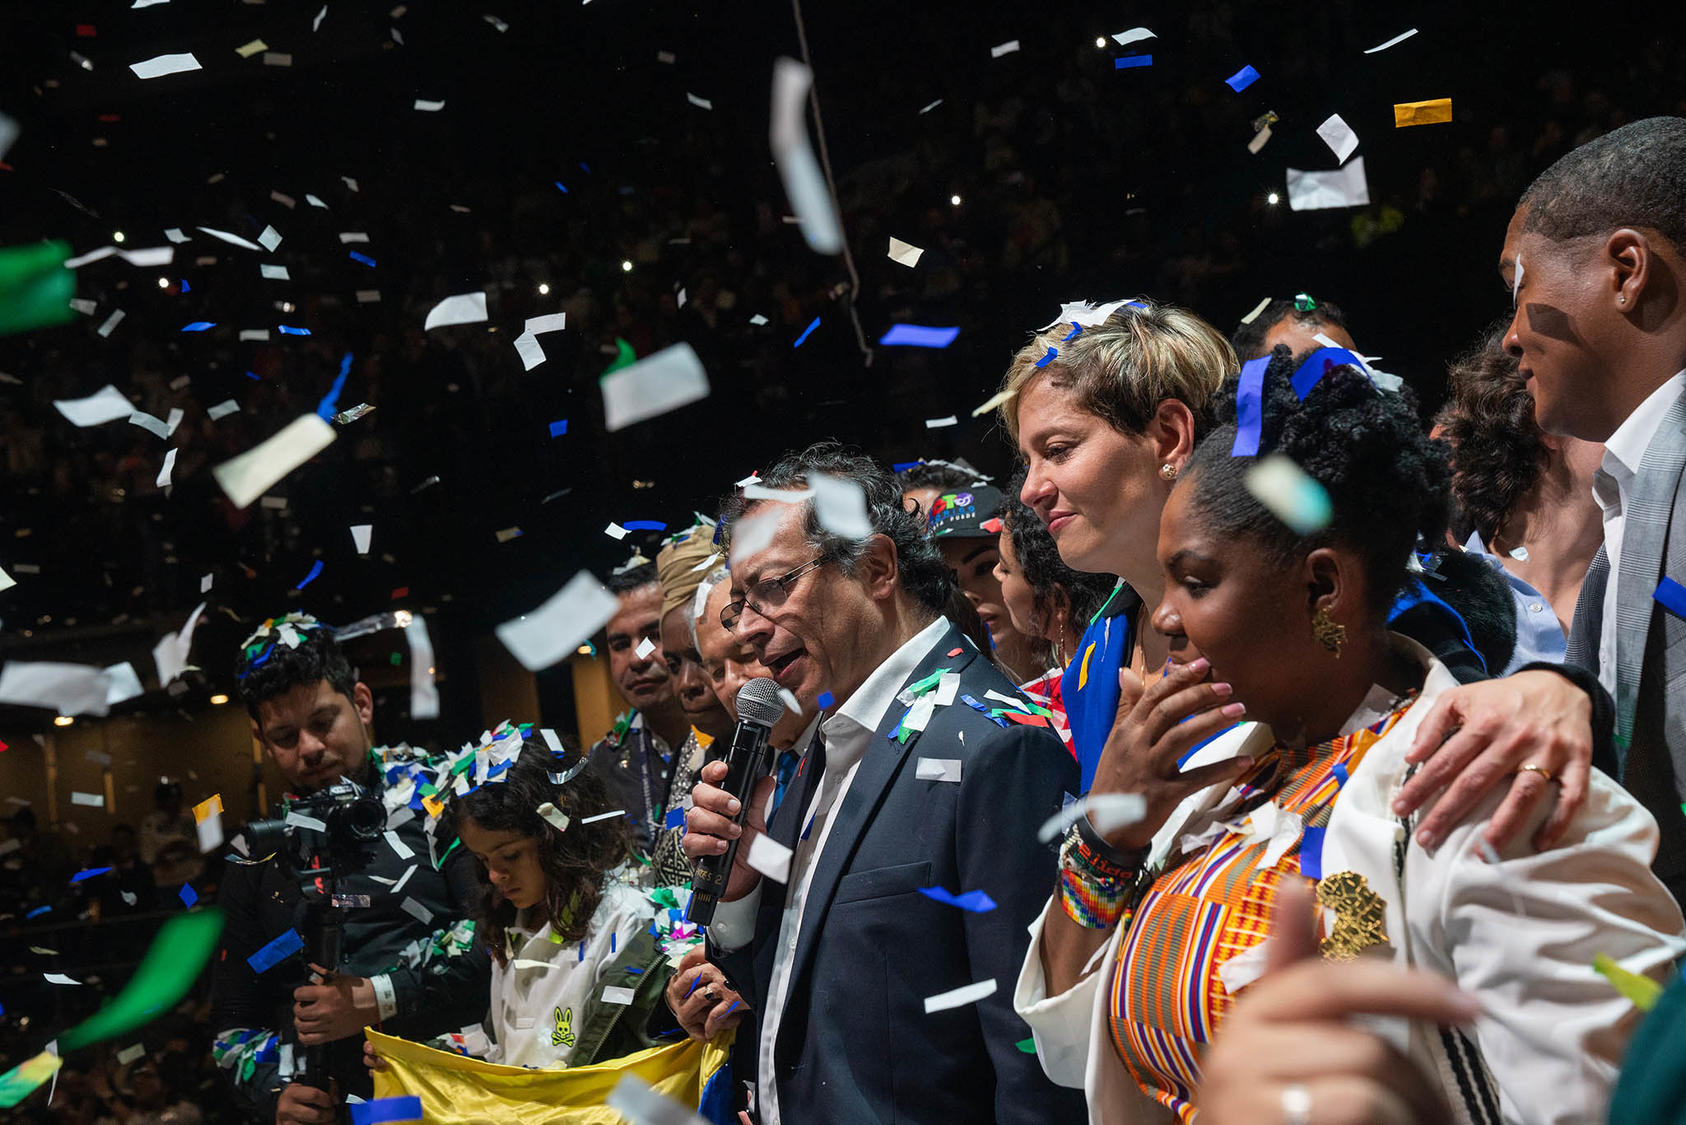 Gustavo Petro and Francia Márquez celebrate after winning the presidential election in Bogotá, Colombia, on Sunday, June 19, 2022. (Federico Rios/The New York Times)